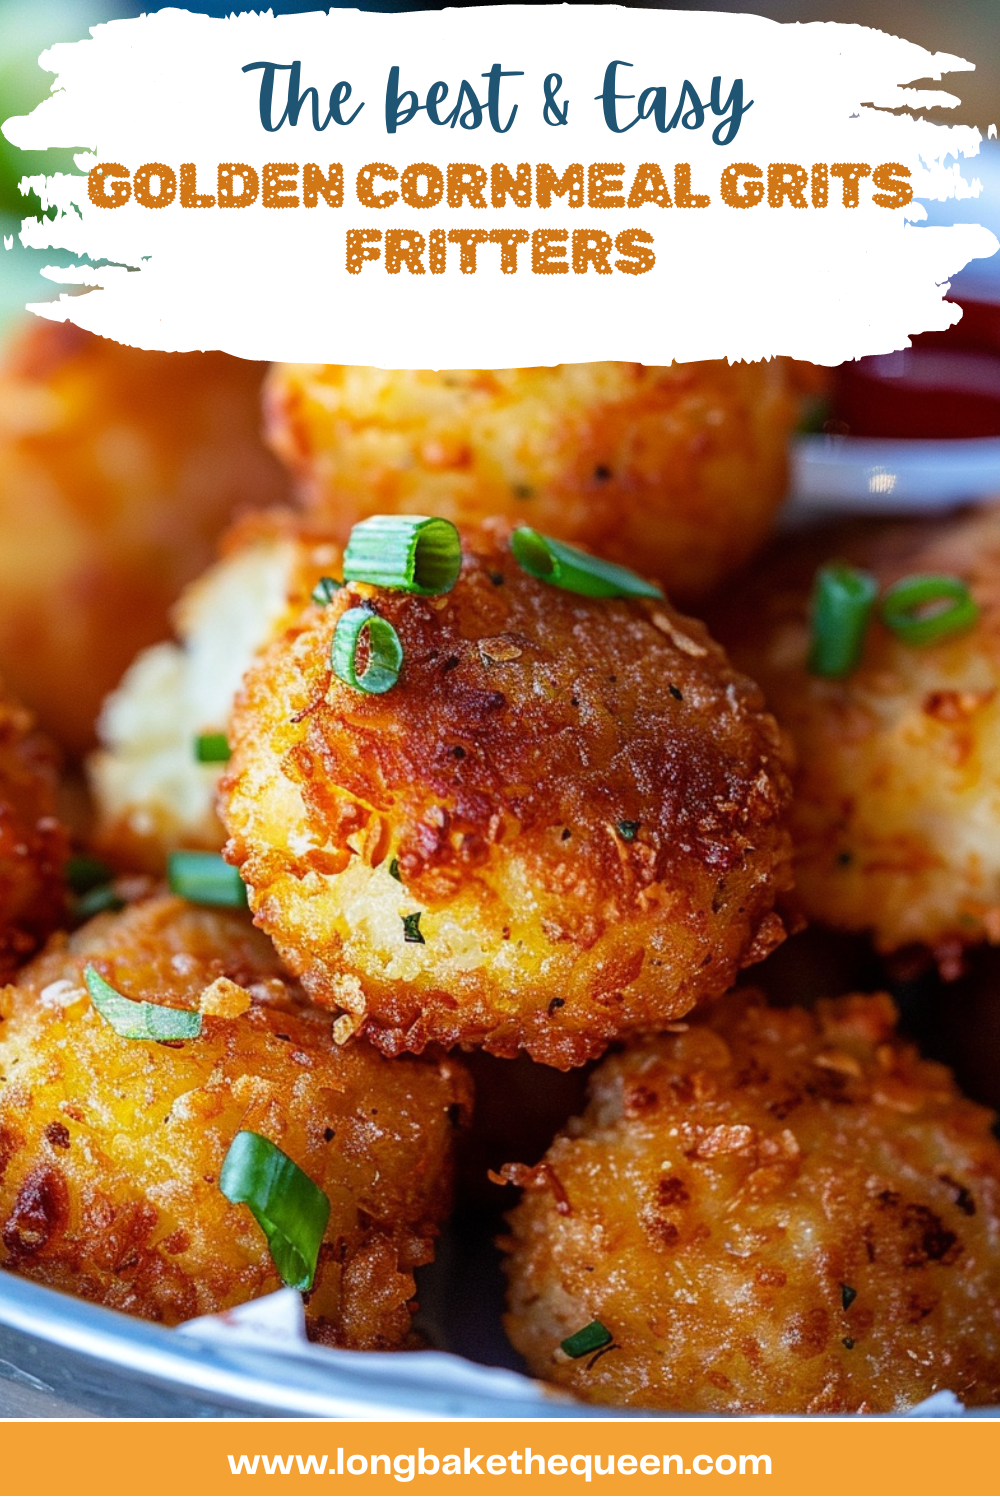 Golden Cornmeal Grits Fritters